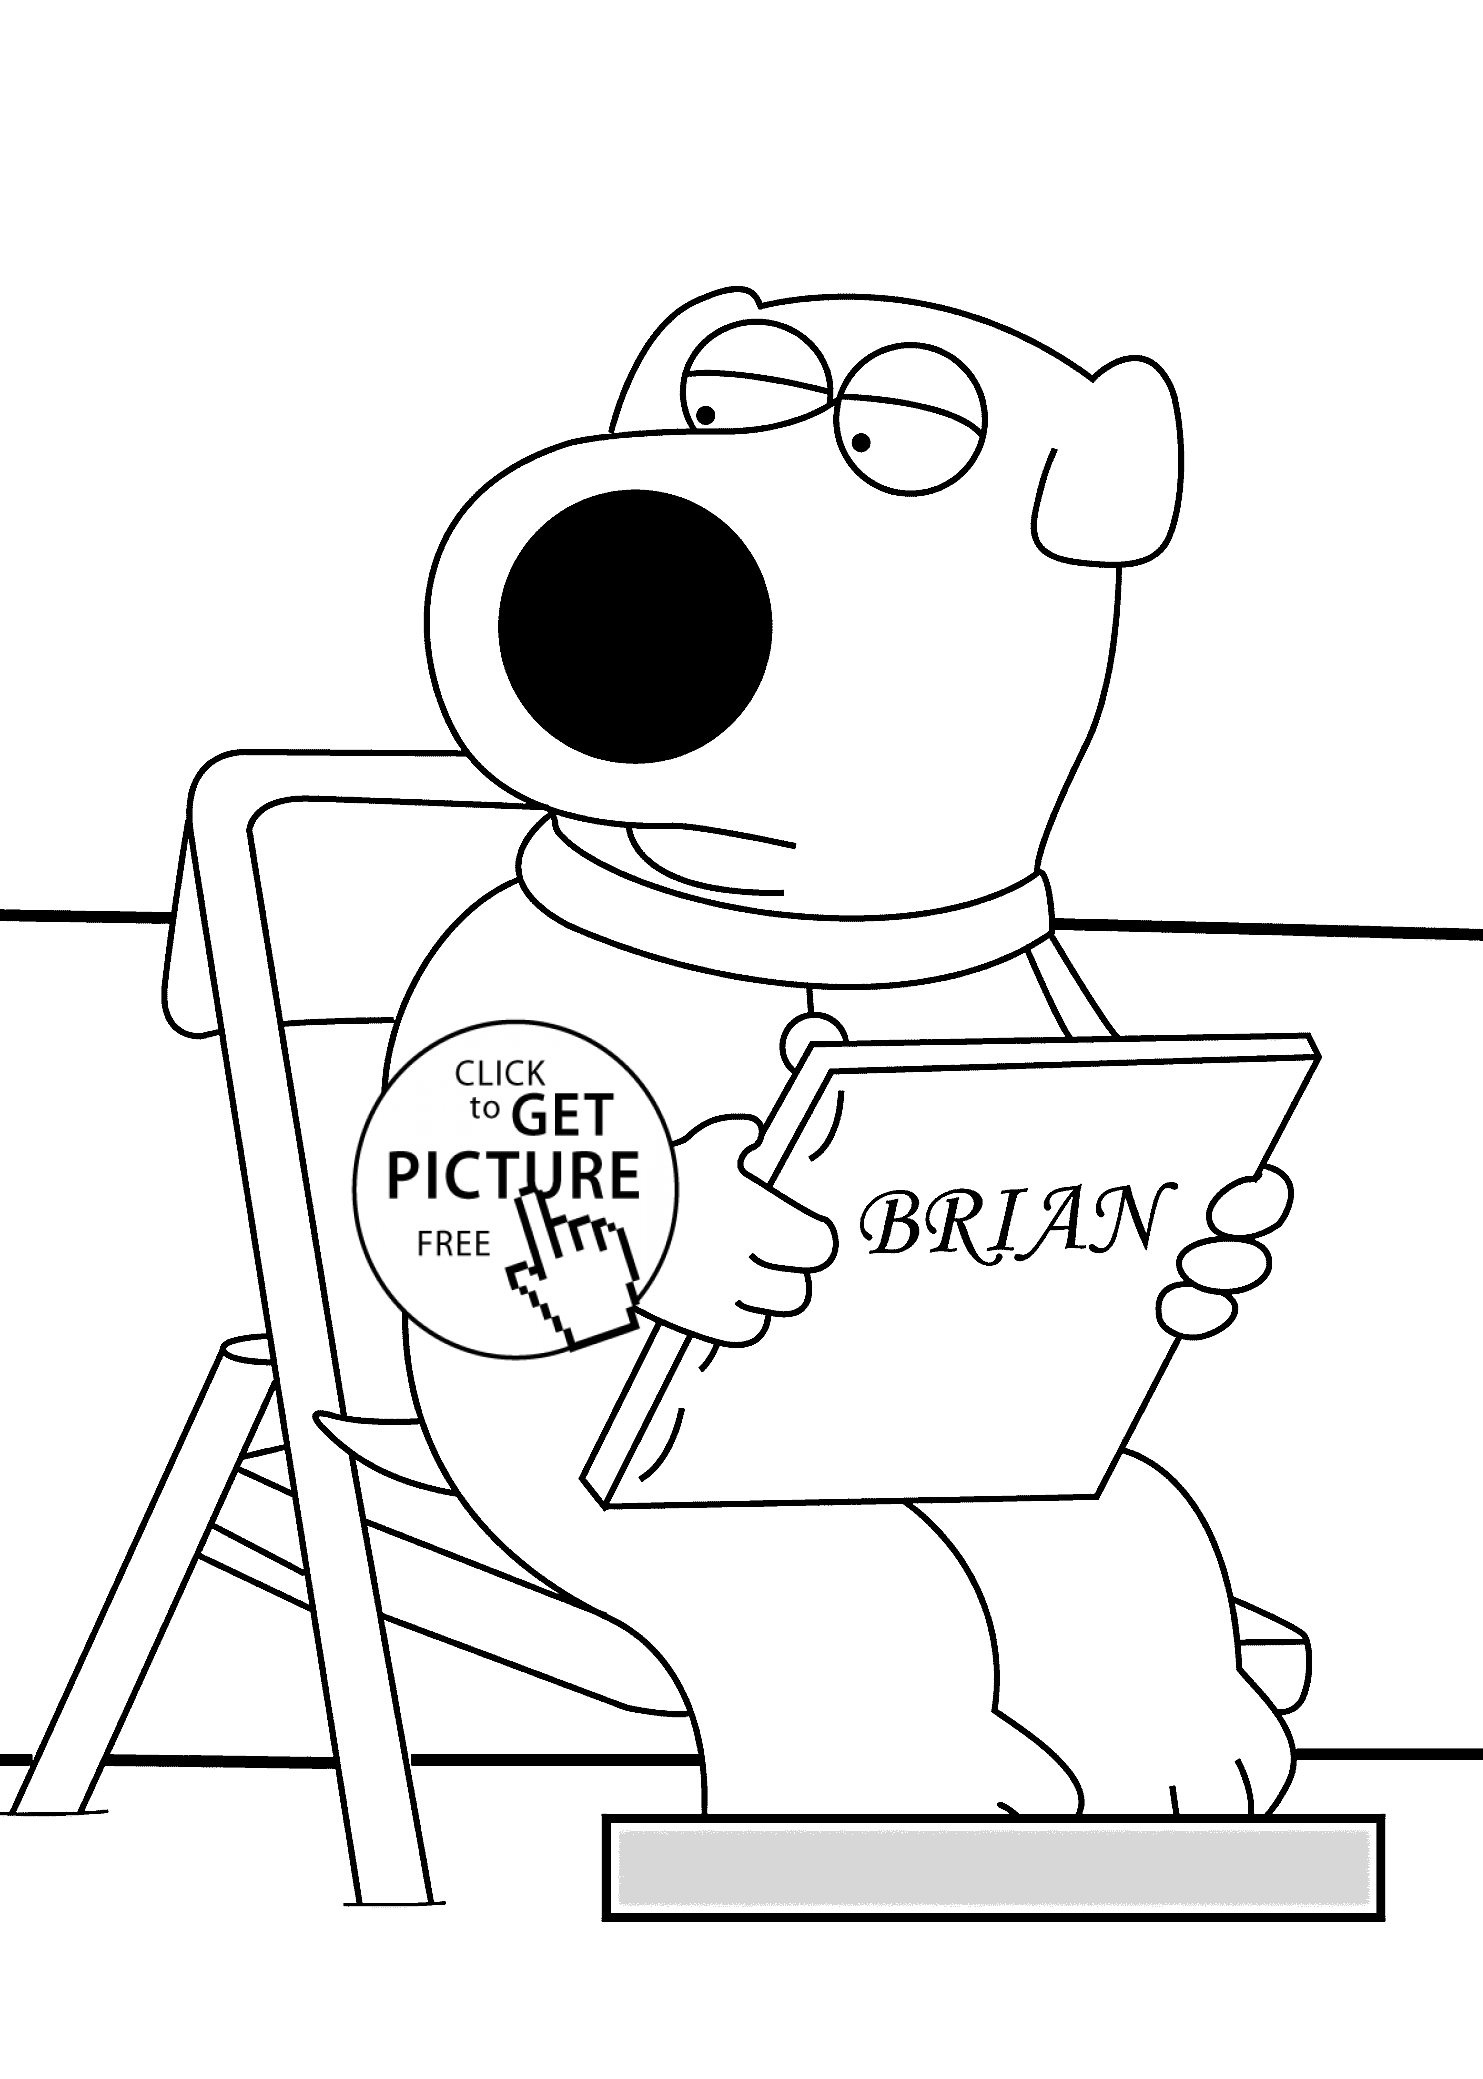 Brian Dog coloring pages for kids, printable free - Family Guy ...